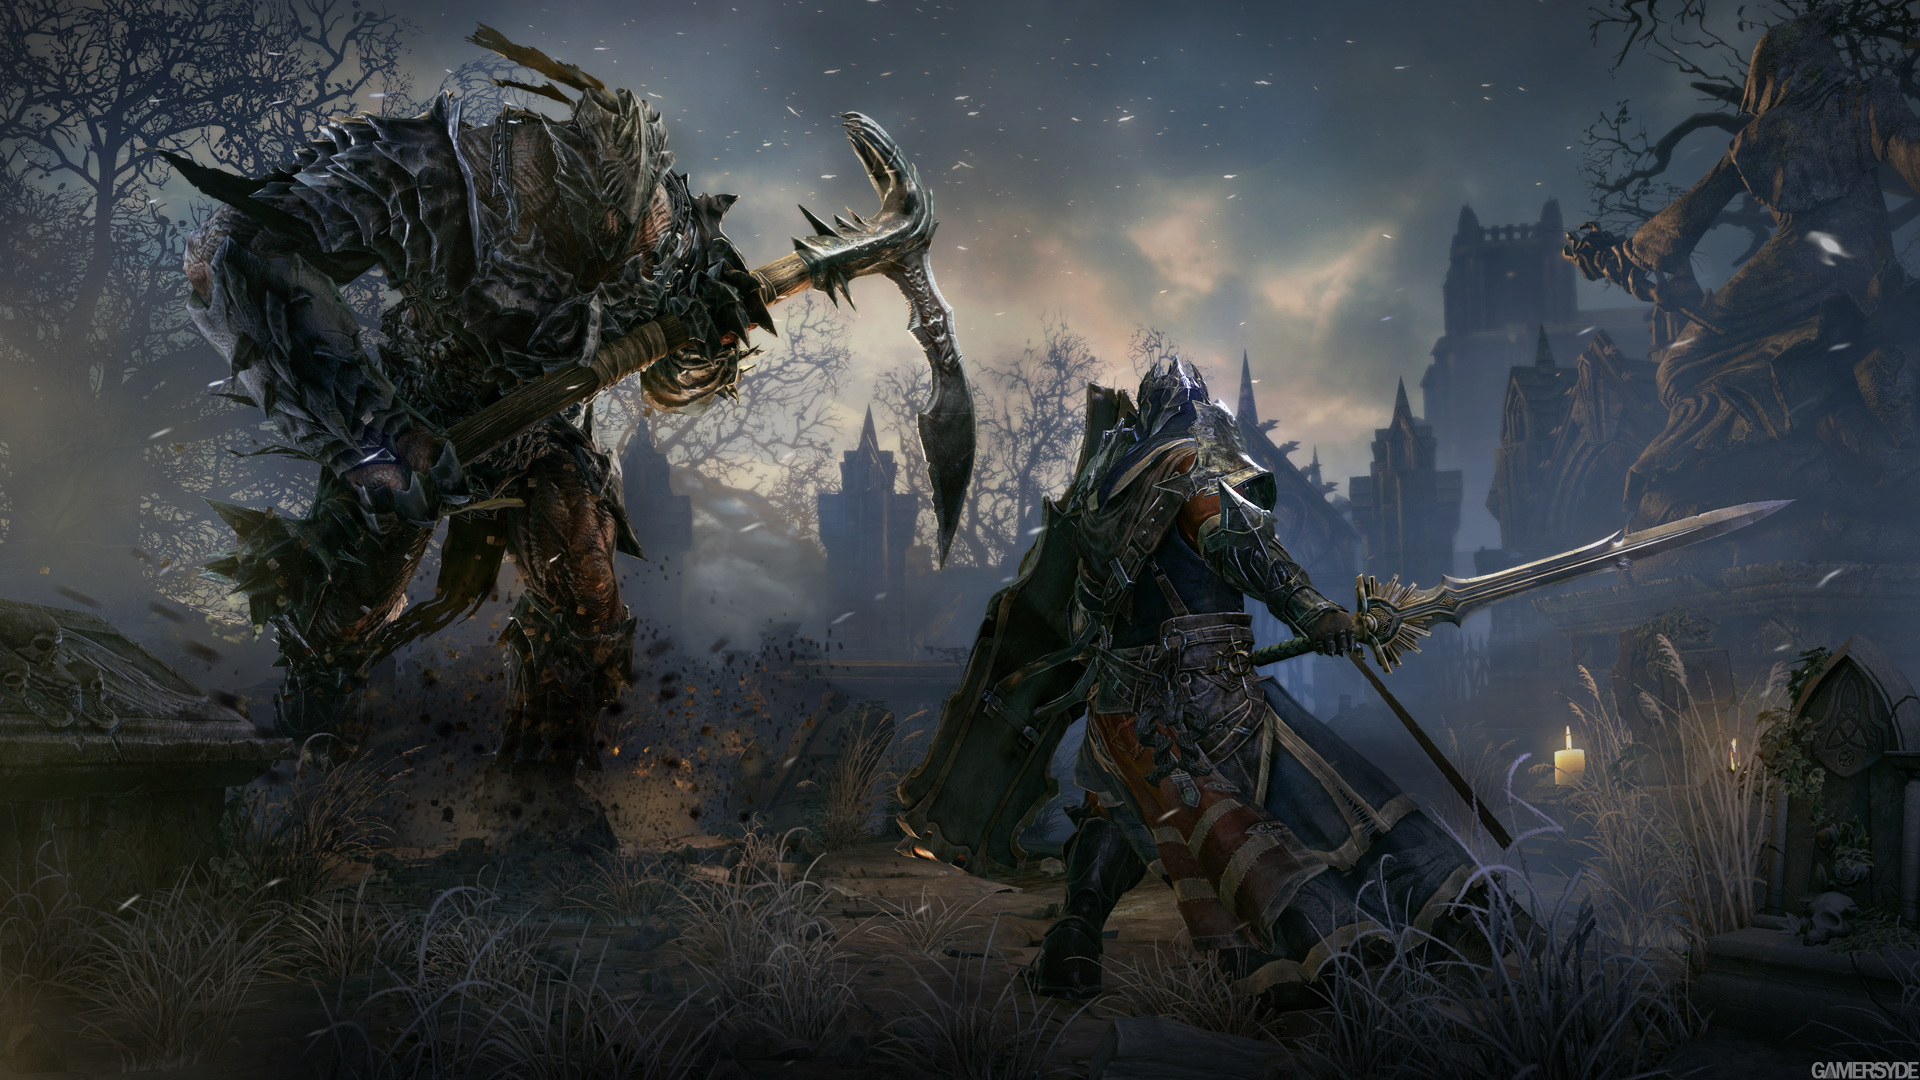 download the new version for ipod Lords of the Fallen